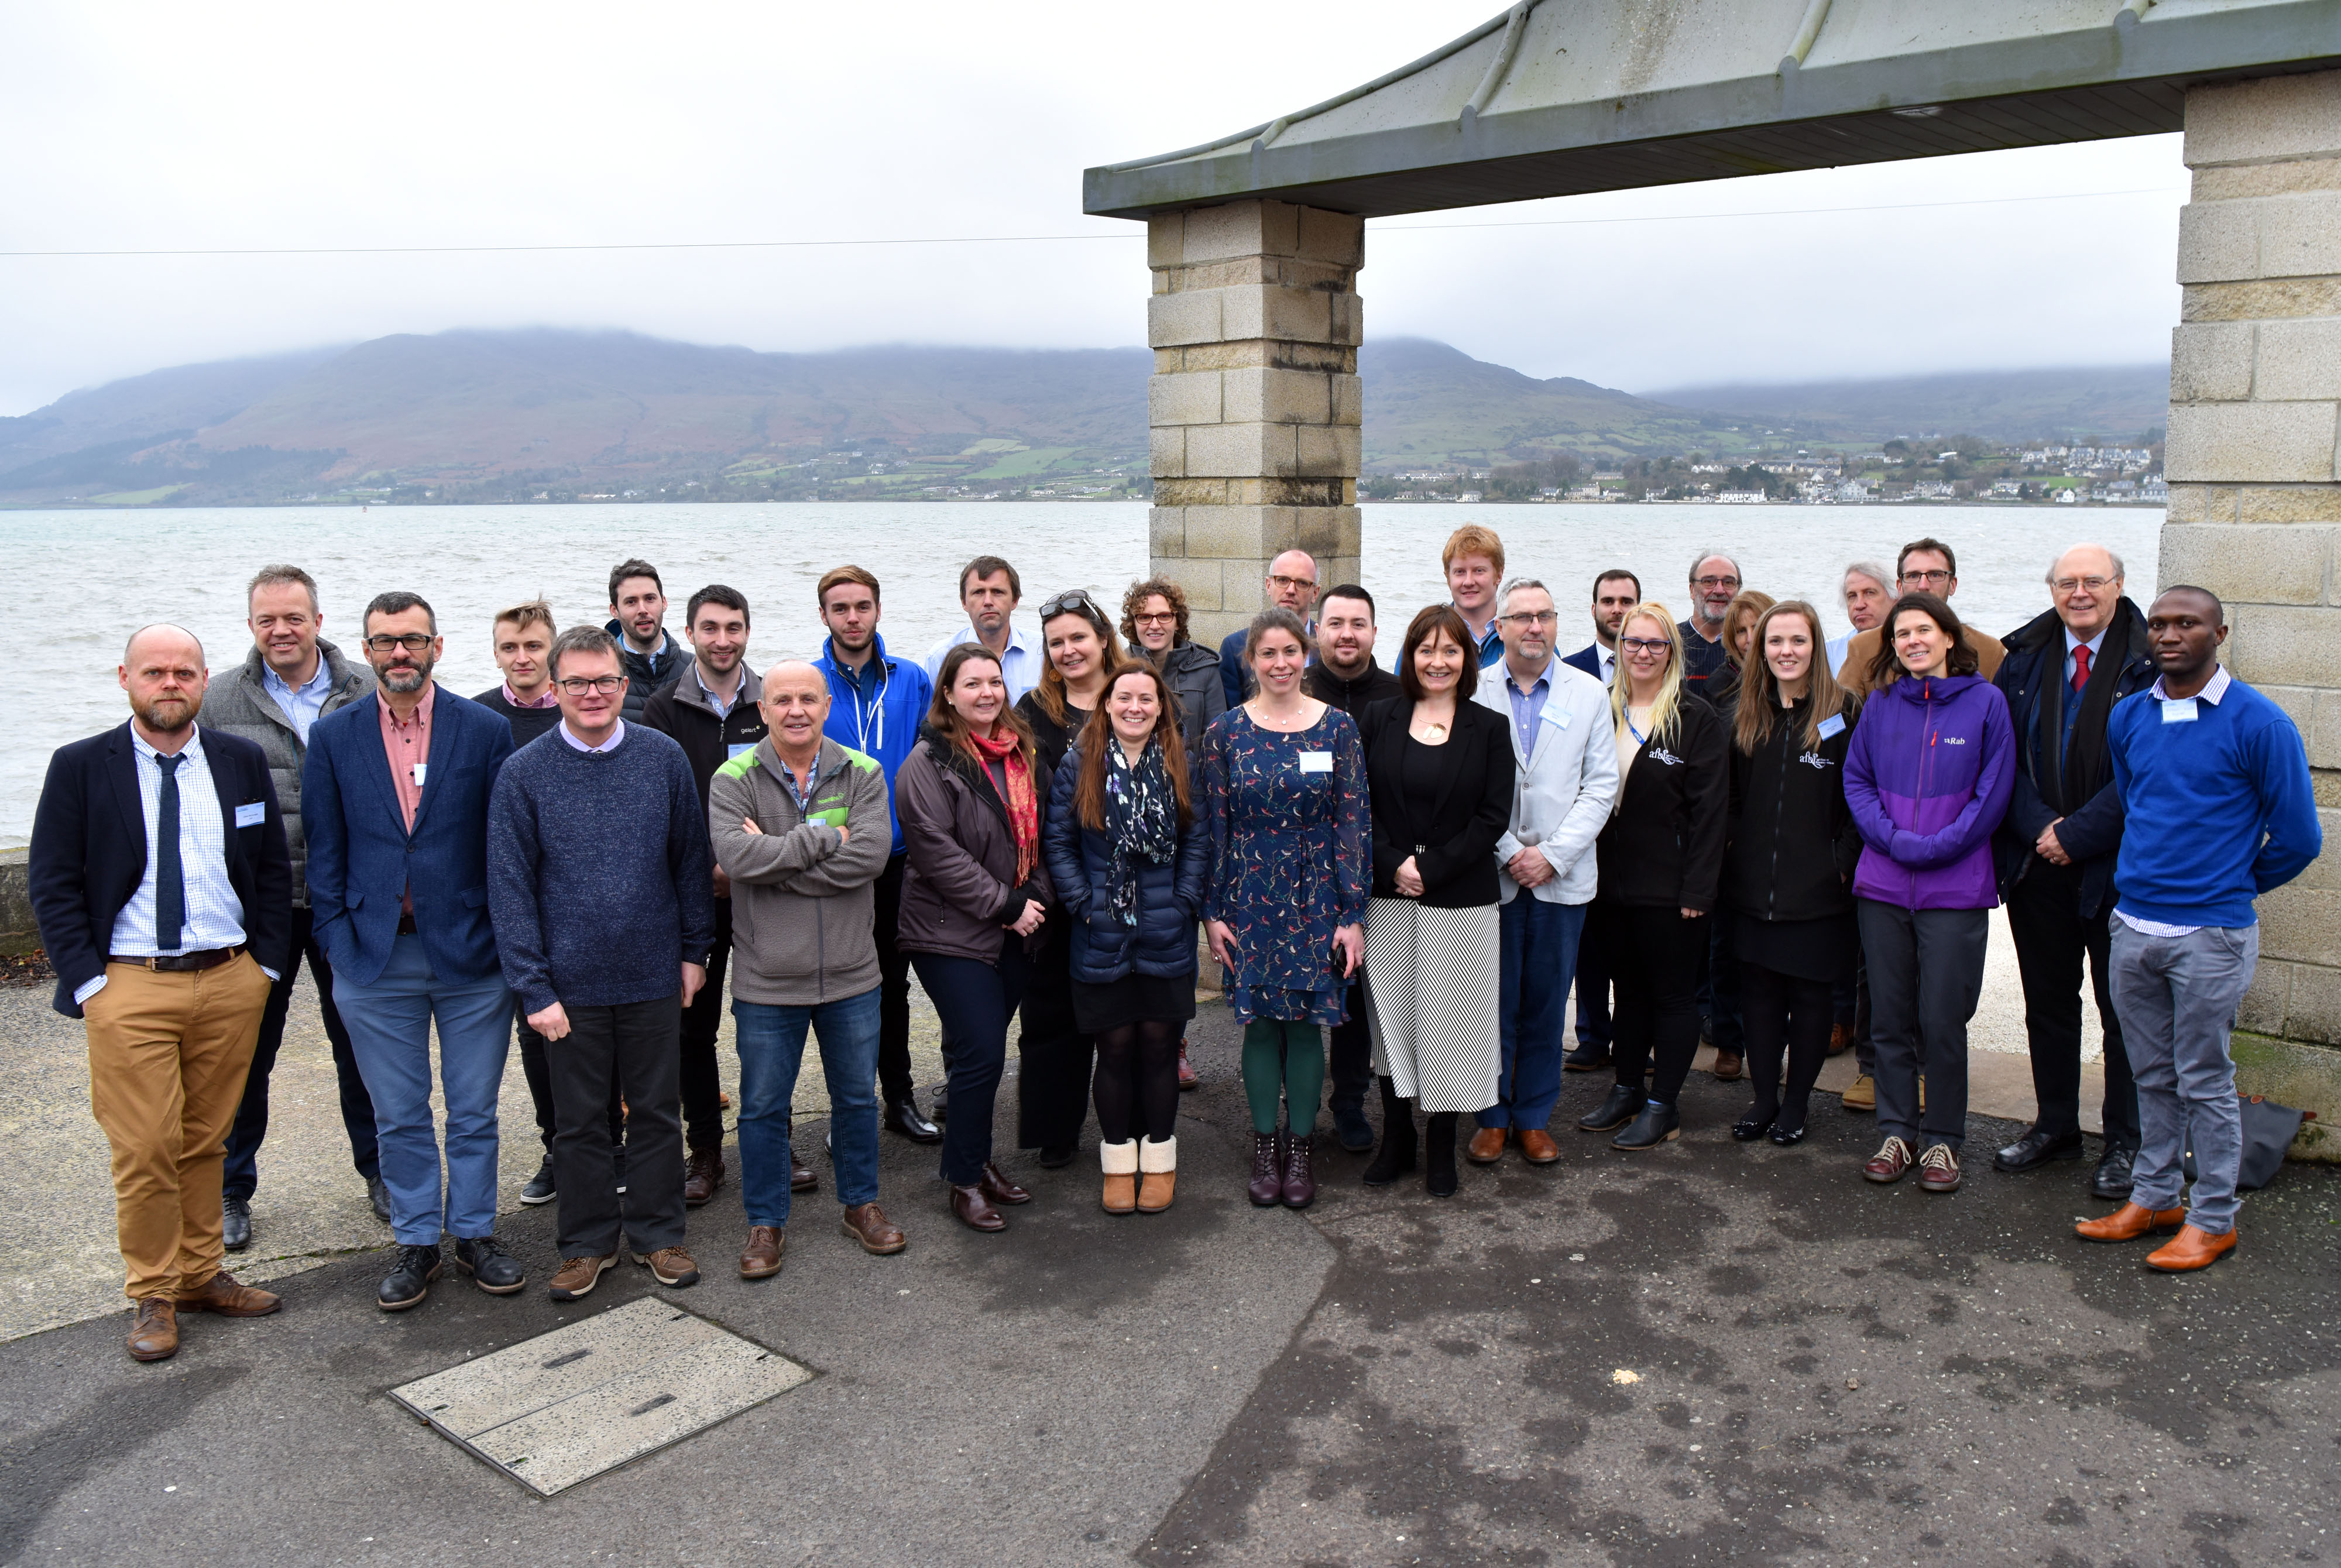 The MarPAMM team at the 2018 kick-off event at Warrenpoint, NI